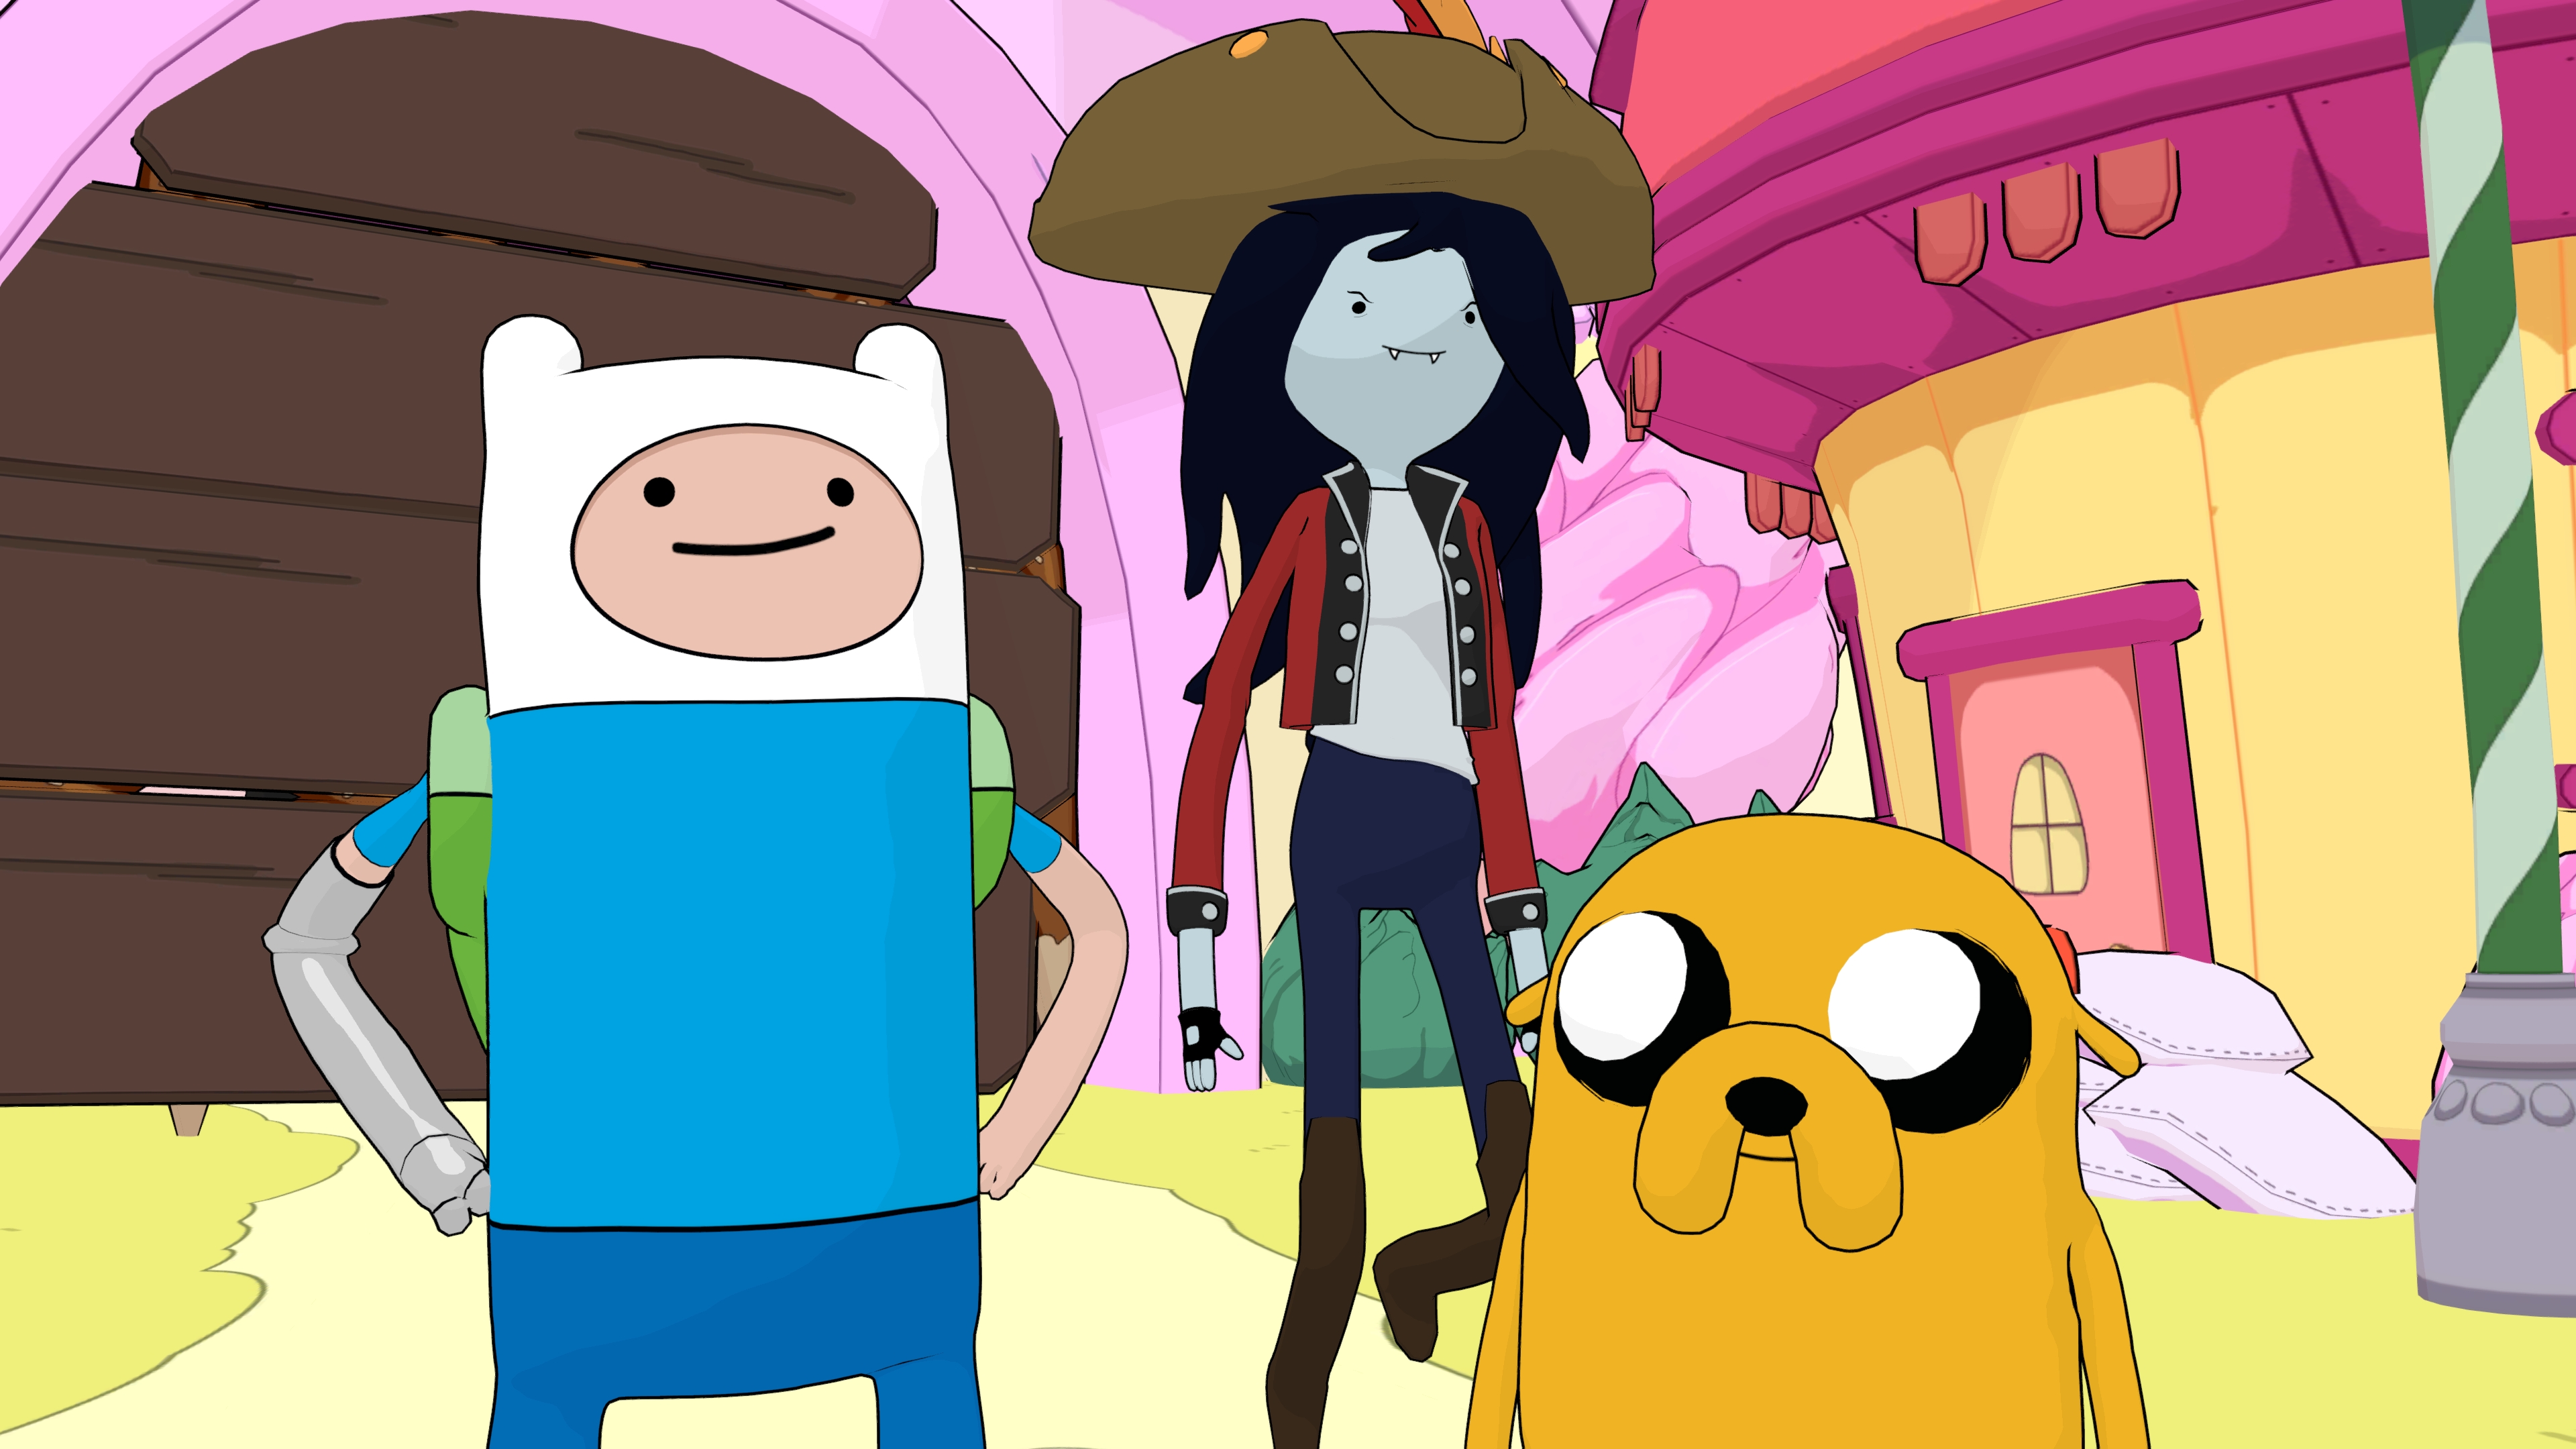 Adventure time: Pirates of the Enchiridion